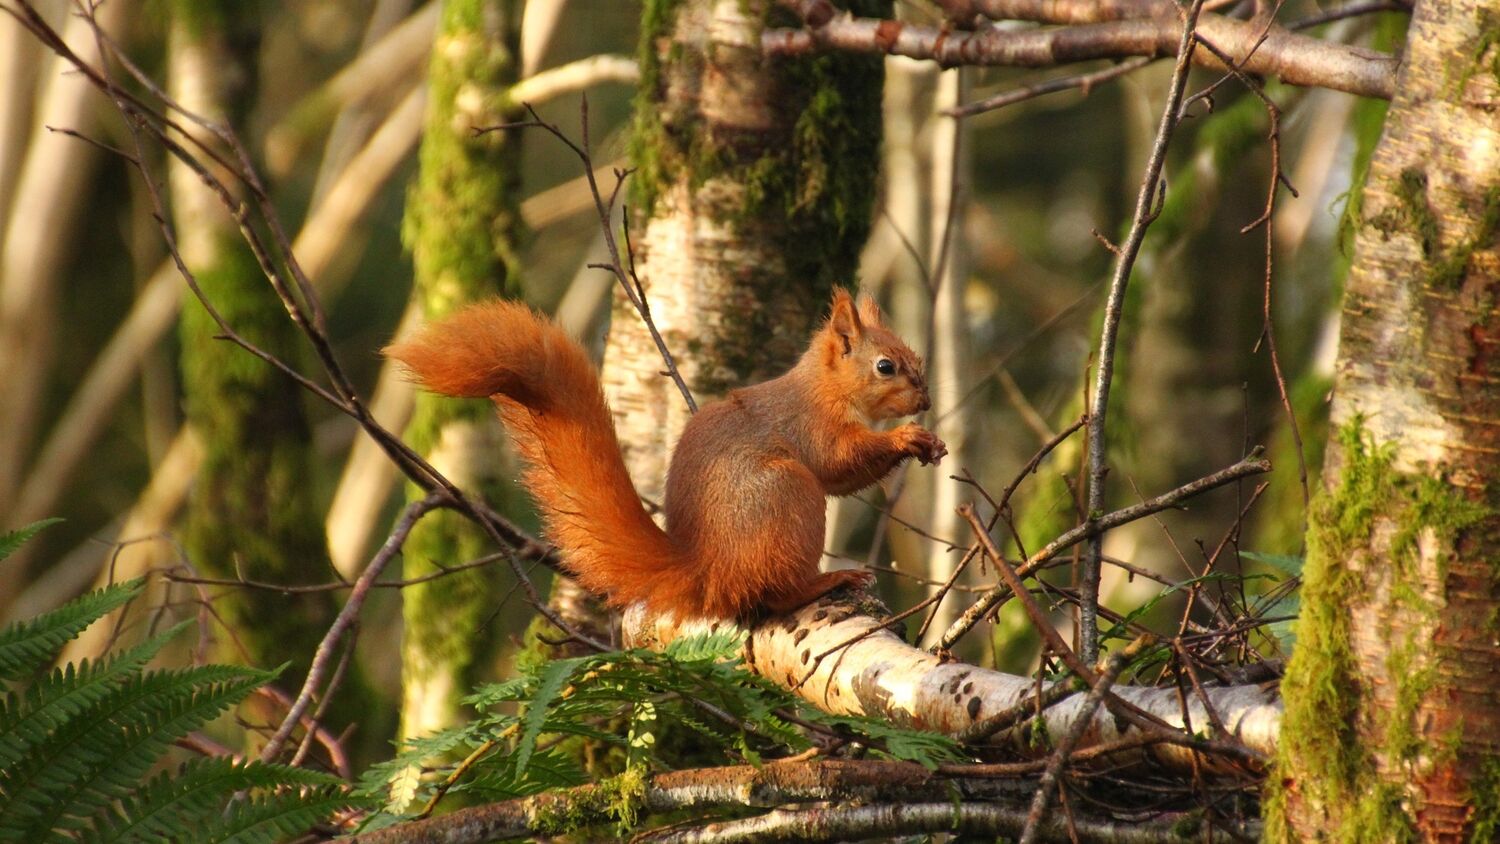 A red squirrel sits on a branch of a birch tree in woodland. It holds a nut in its front paws. Its long, red, bushy tail is held up behind it.